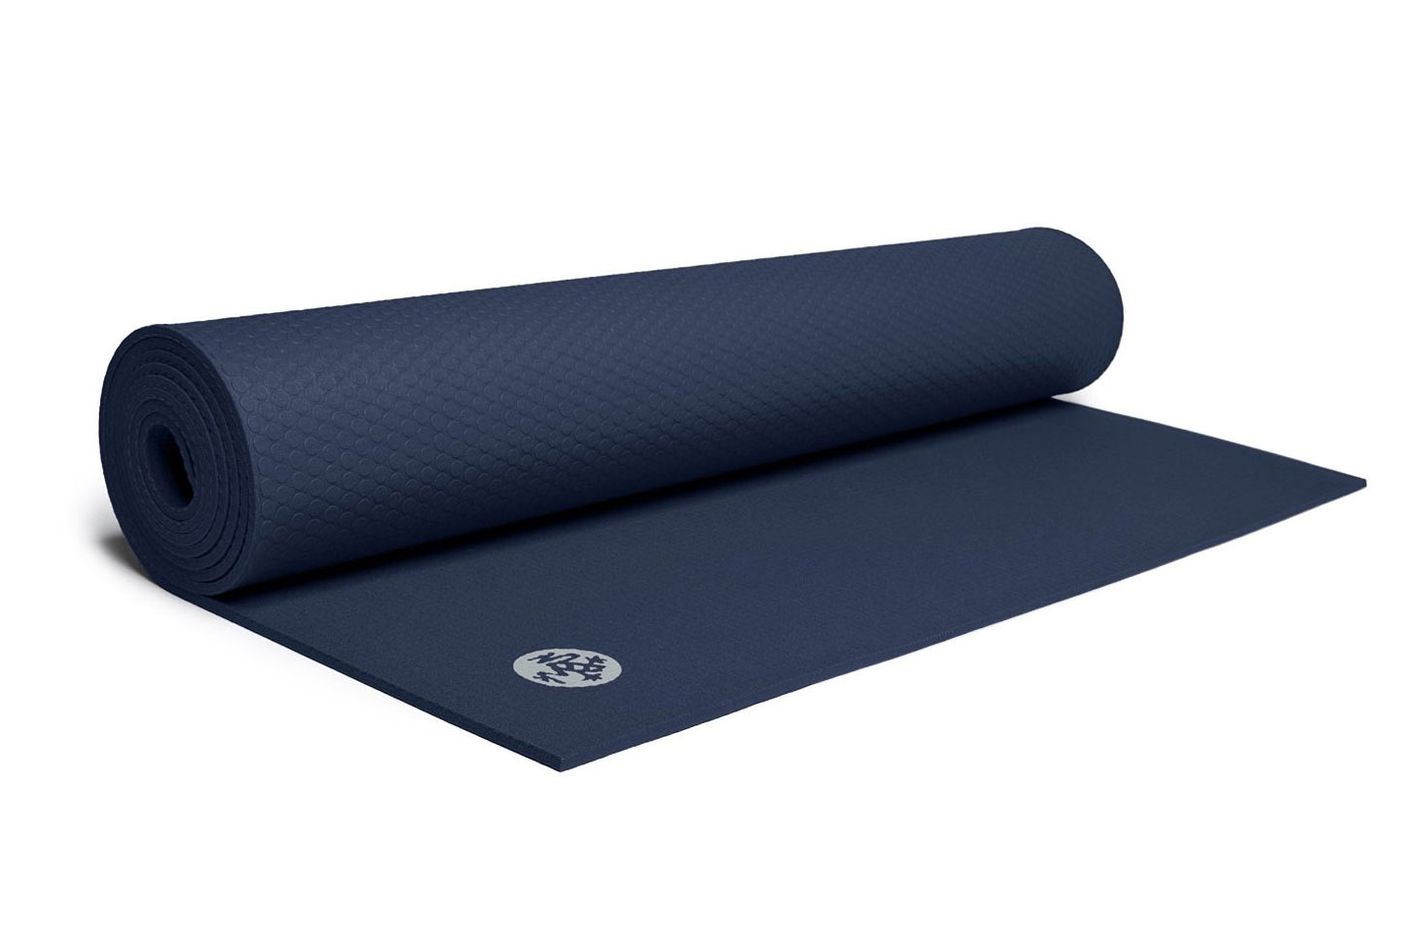 The Best Yoga Mat, According to Yogis